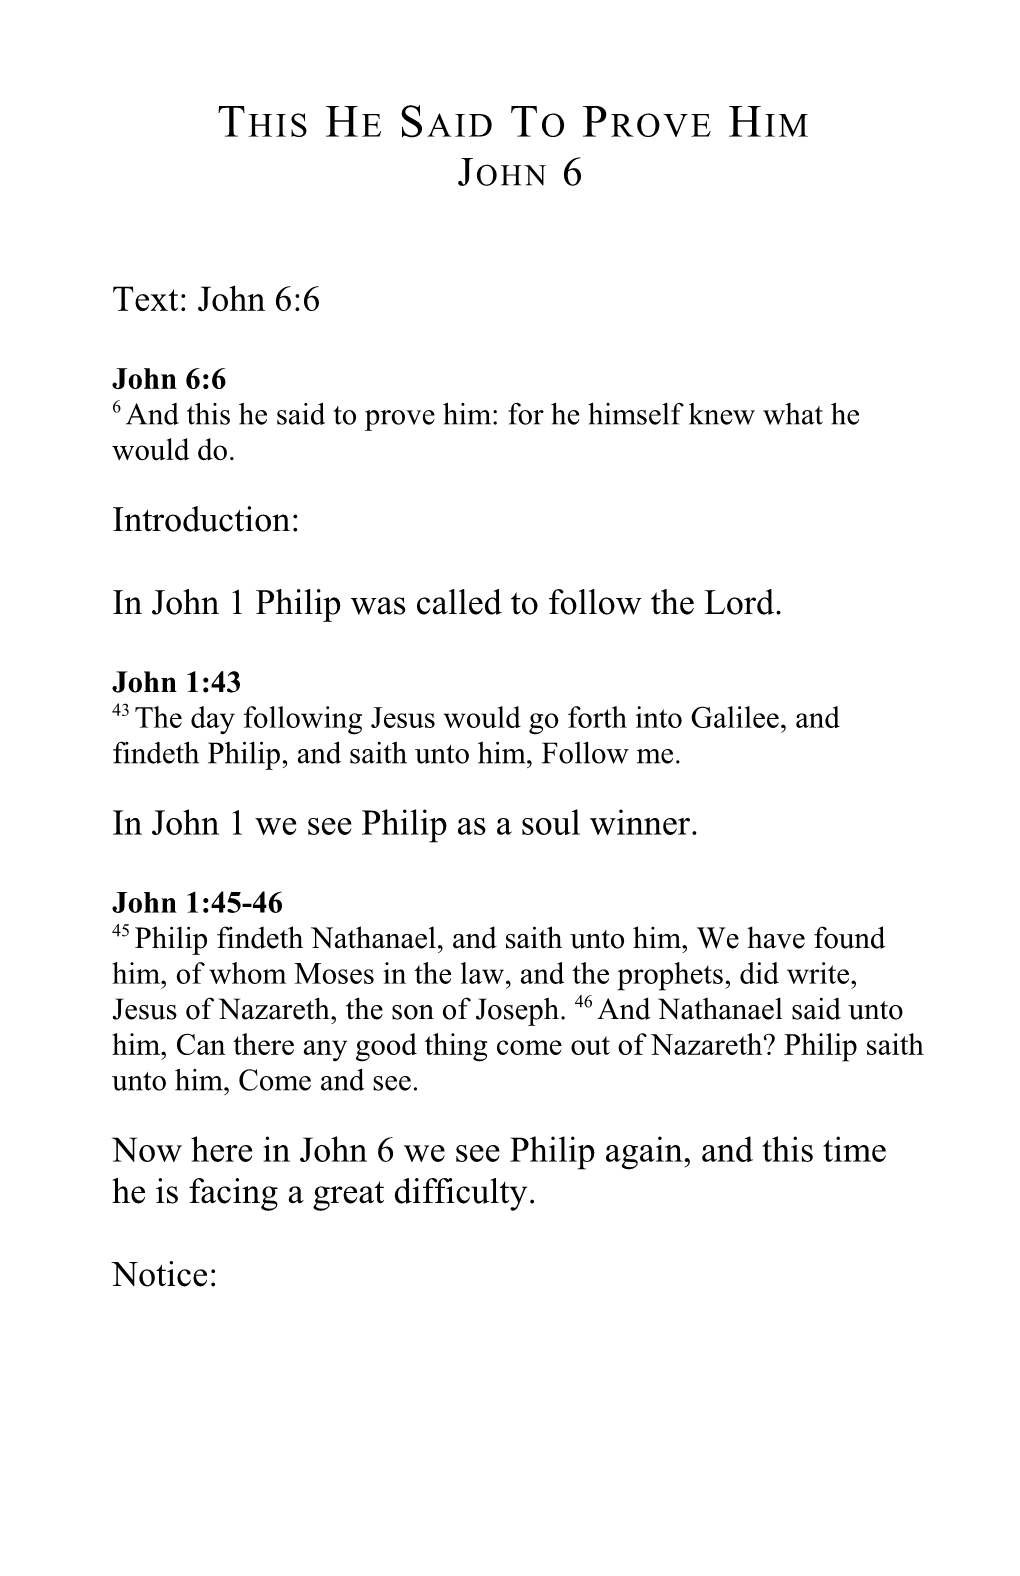 In John 1 Philip Was Called to Follow the Lord